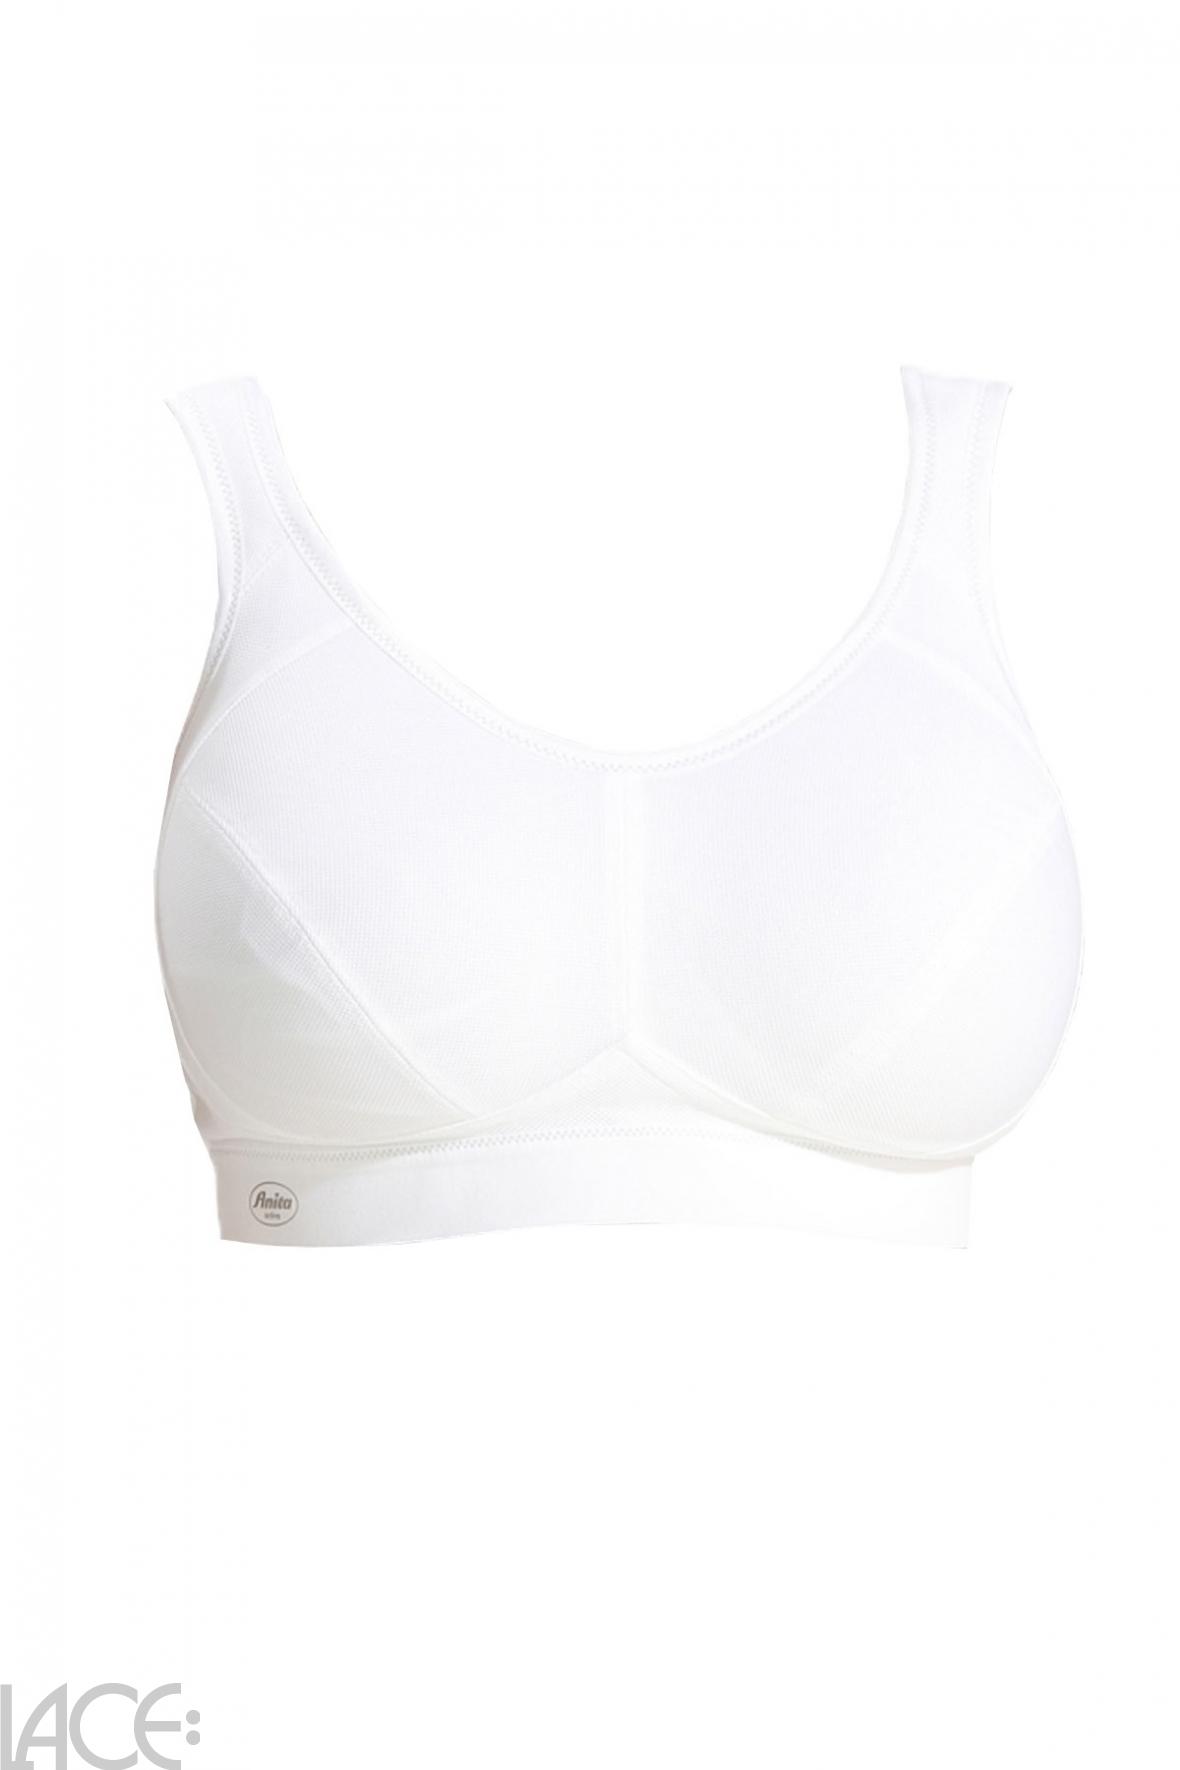 adviicd High Support Sports Bras for Women Womens Seamed Soft Cup Wirefree  Cotton Bra White 85D 